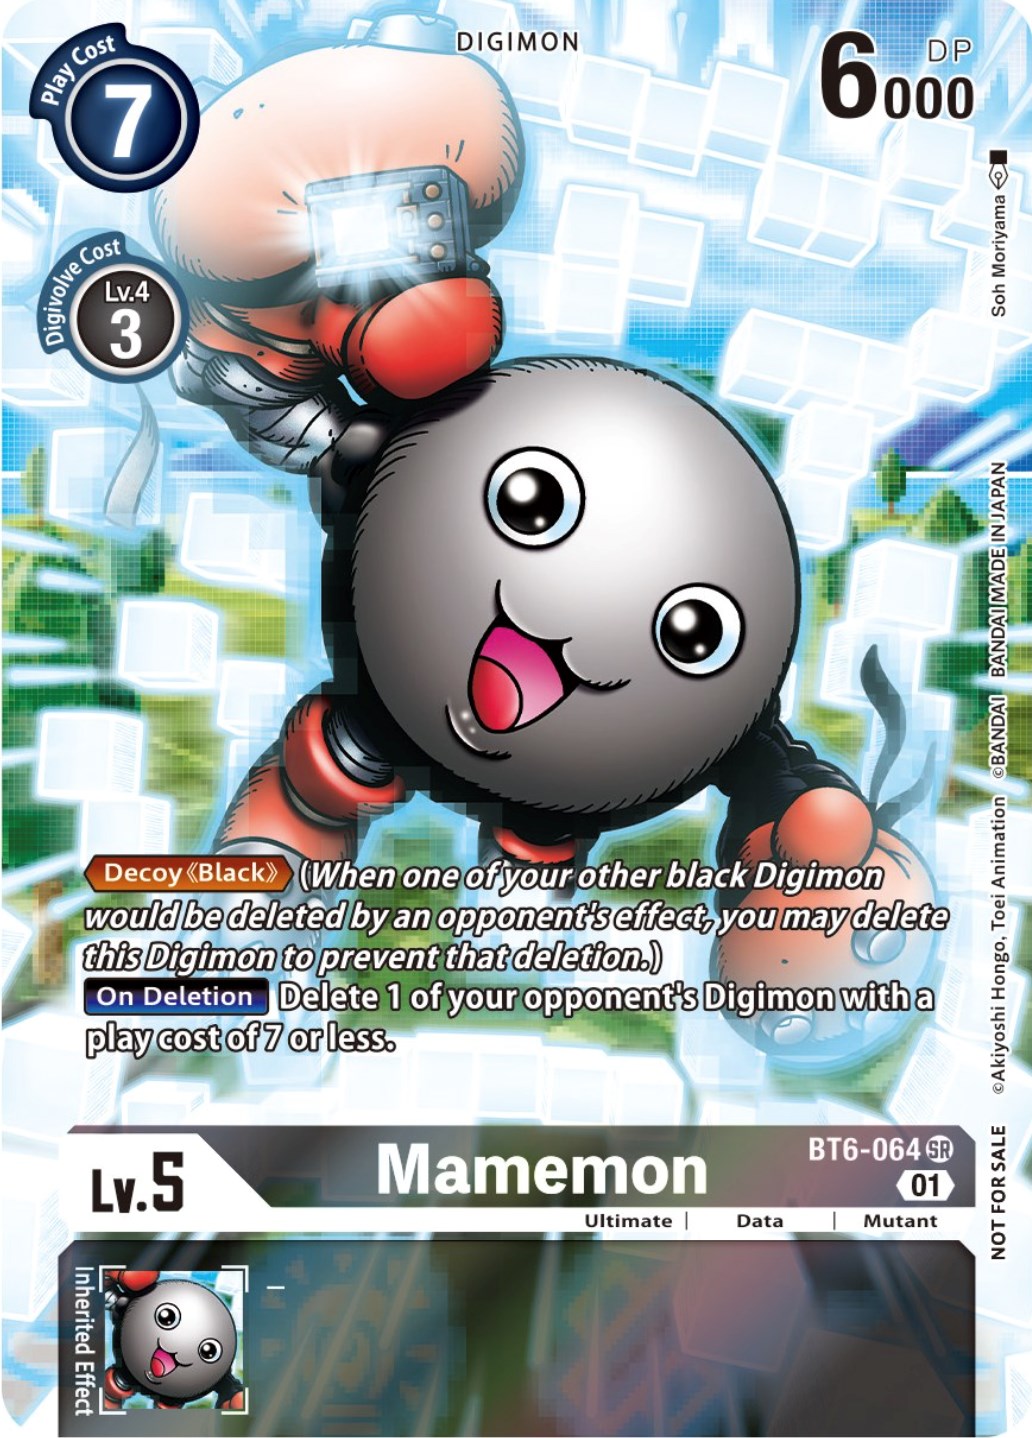 Mamemon [BT6-064] (25th Special Memorial Pack) [Double Diamond Promos] | Anubis Games and Hobby